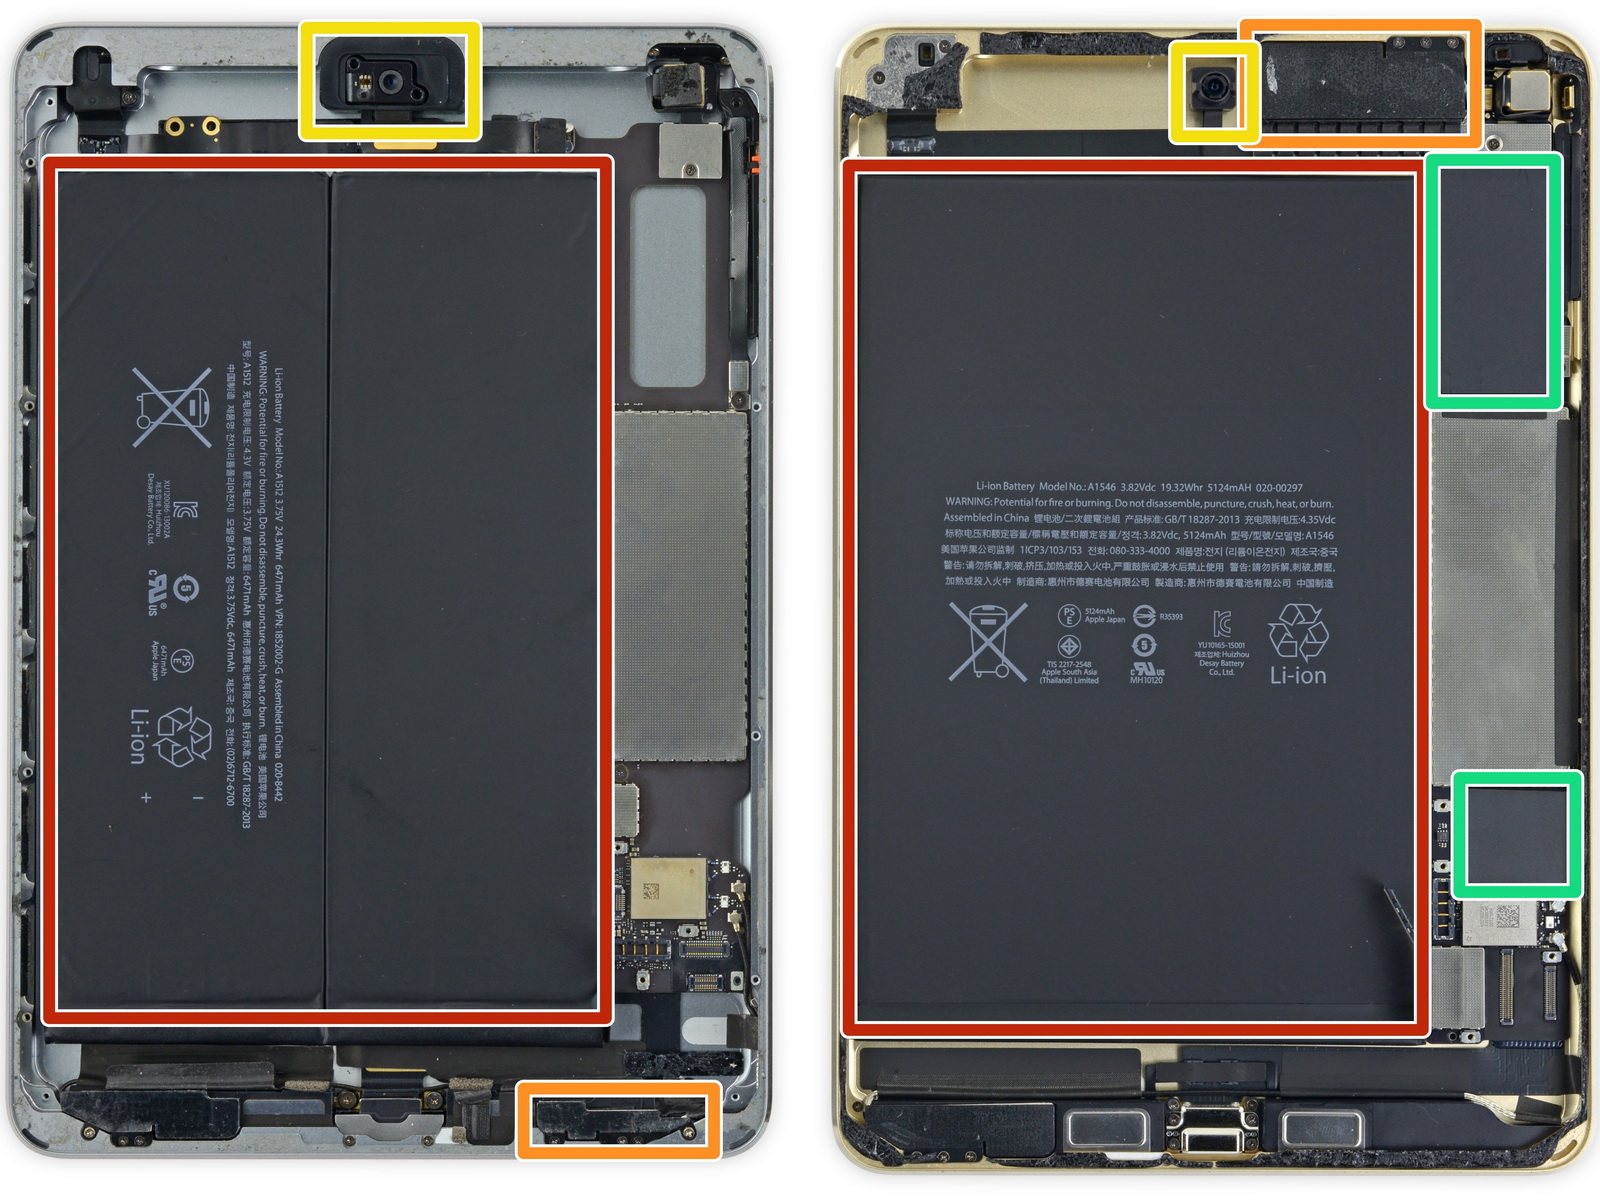 Apple iPad Mini 4 is difficult to repair says iFixit - NotebookCheck